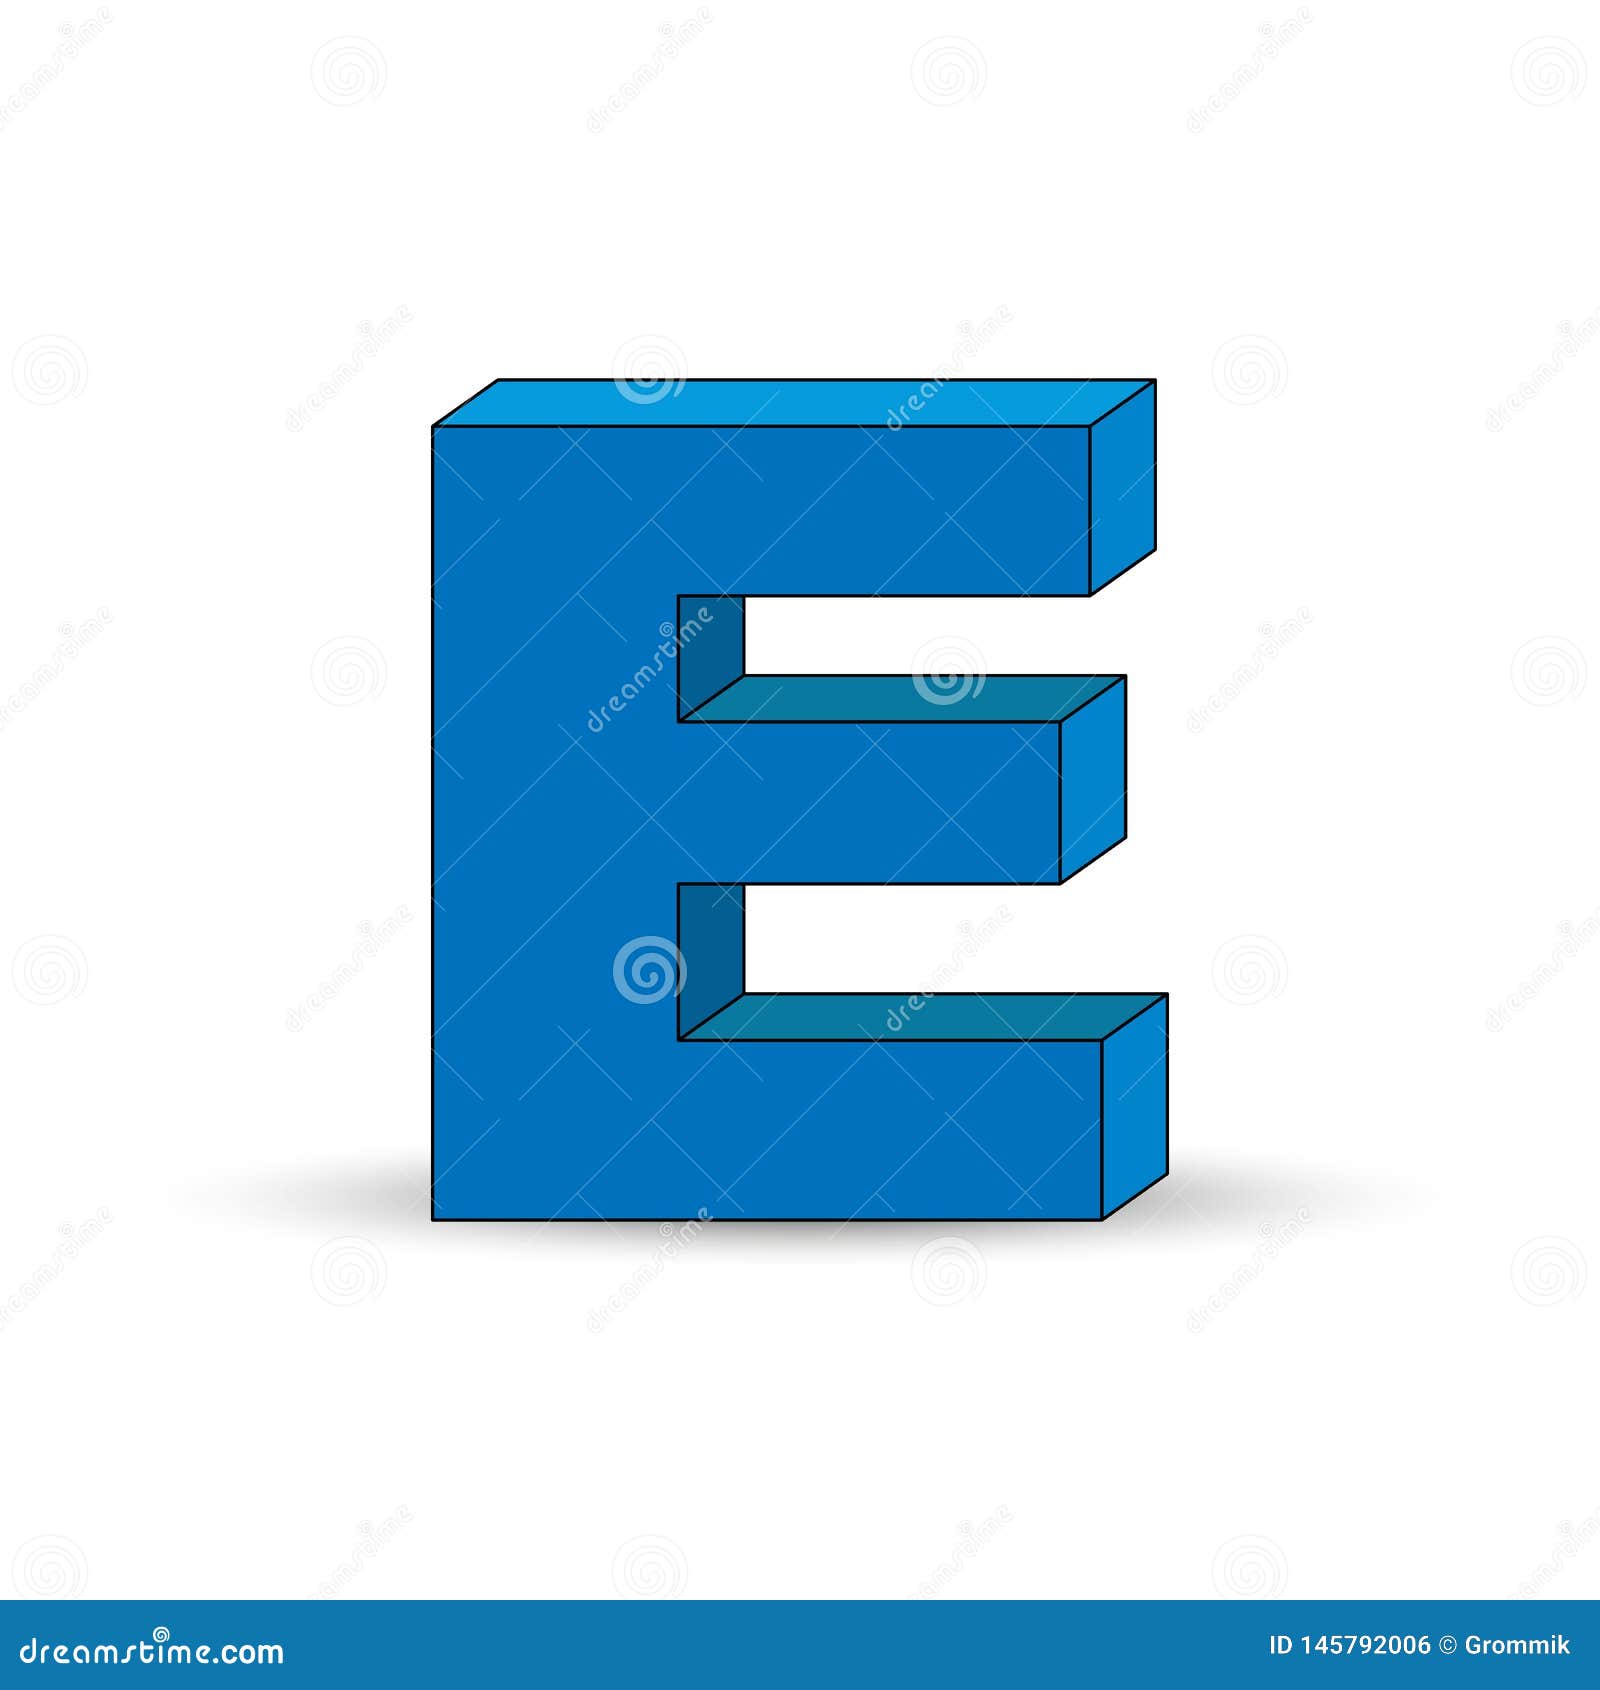 Three Dimensional Image Of The Letter E The Simulated 3d Volume Stock Vector Illustration Of Alphabet Shadow